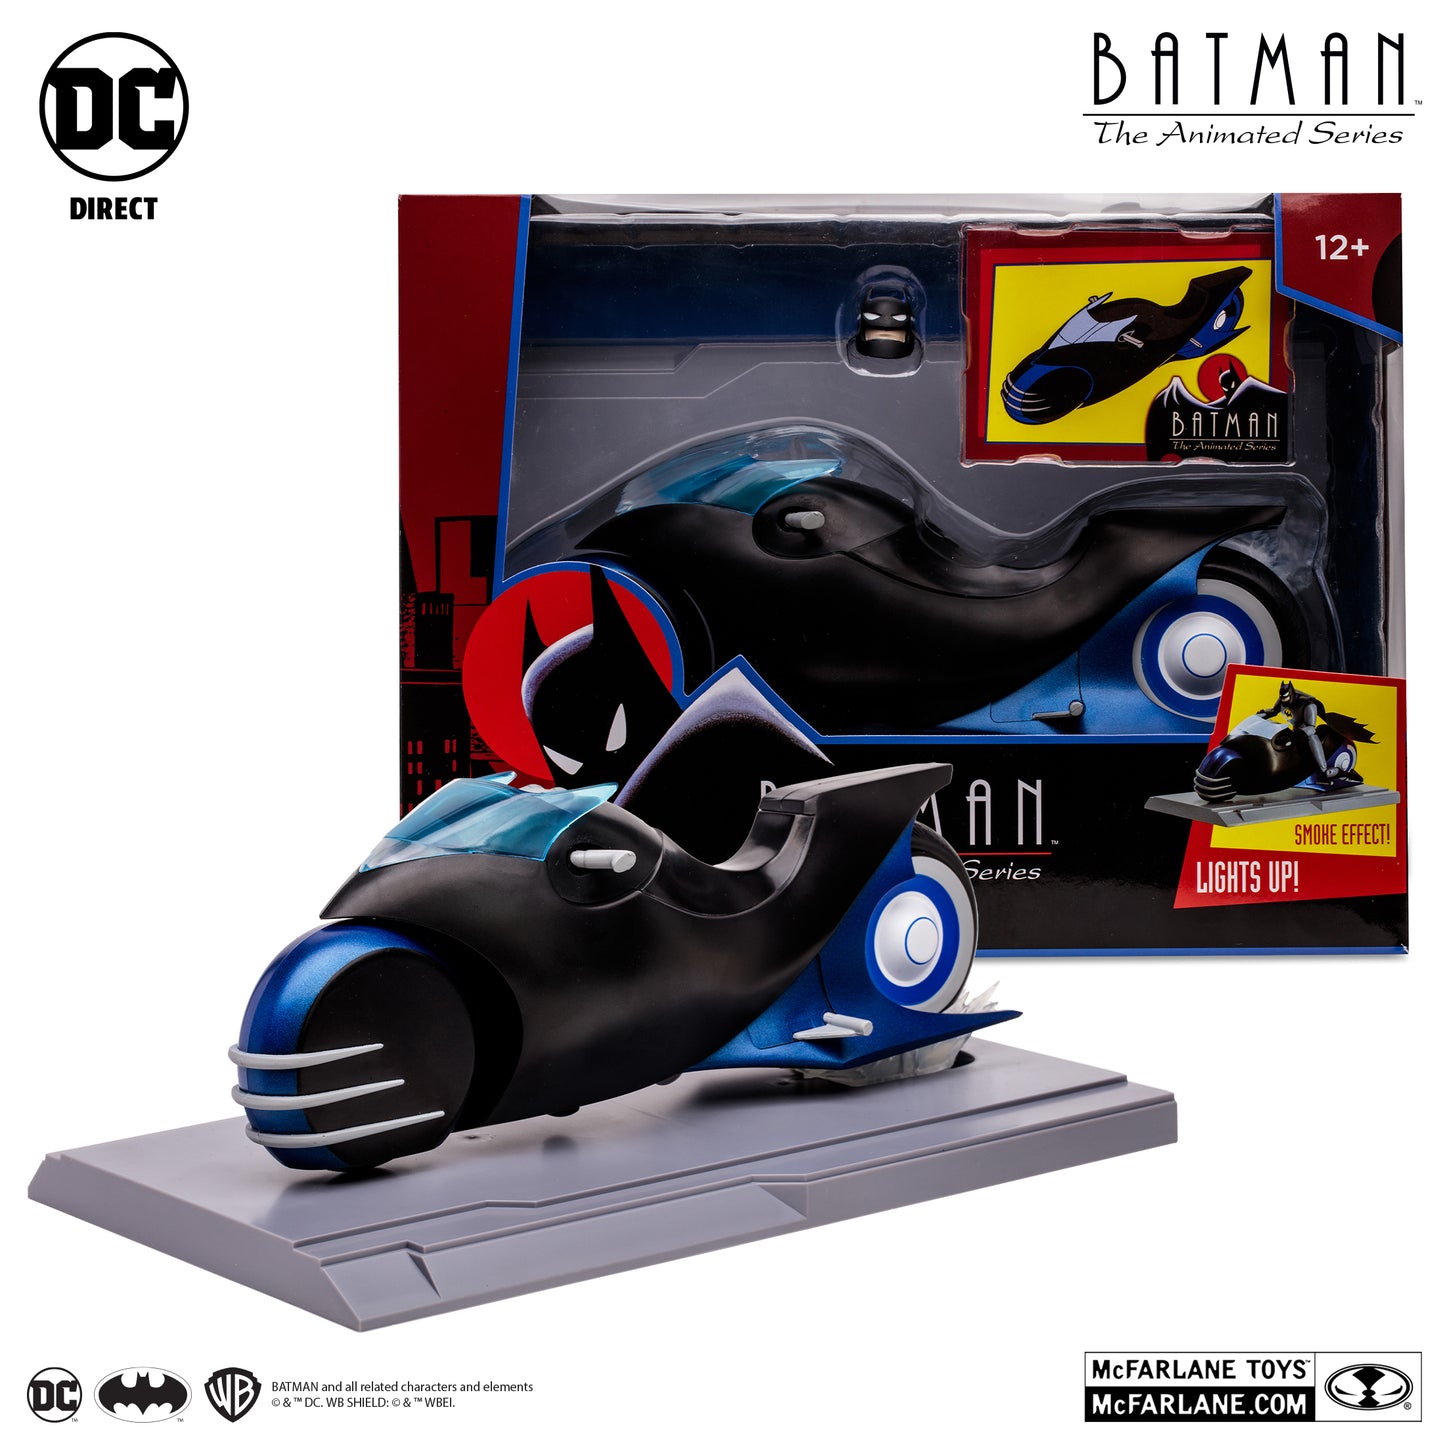 The Animated Series Batcycle